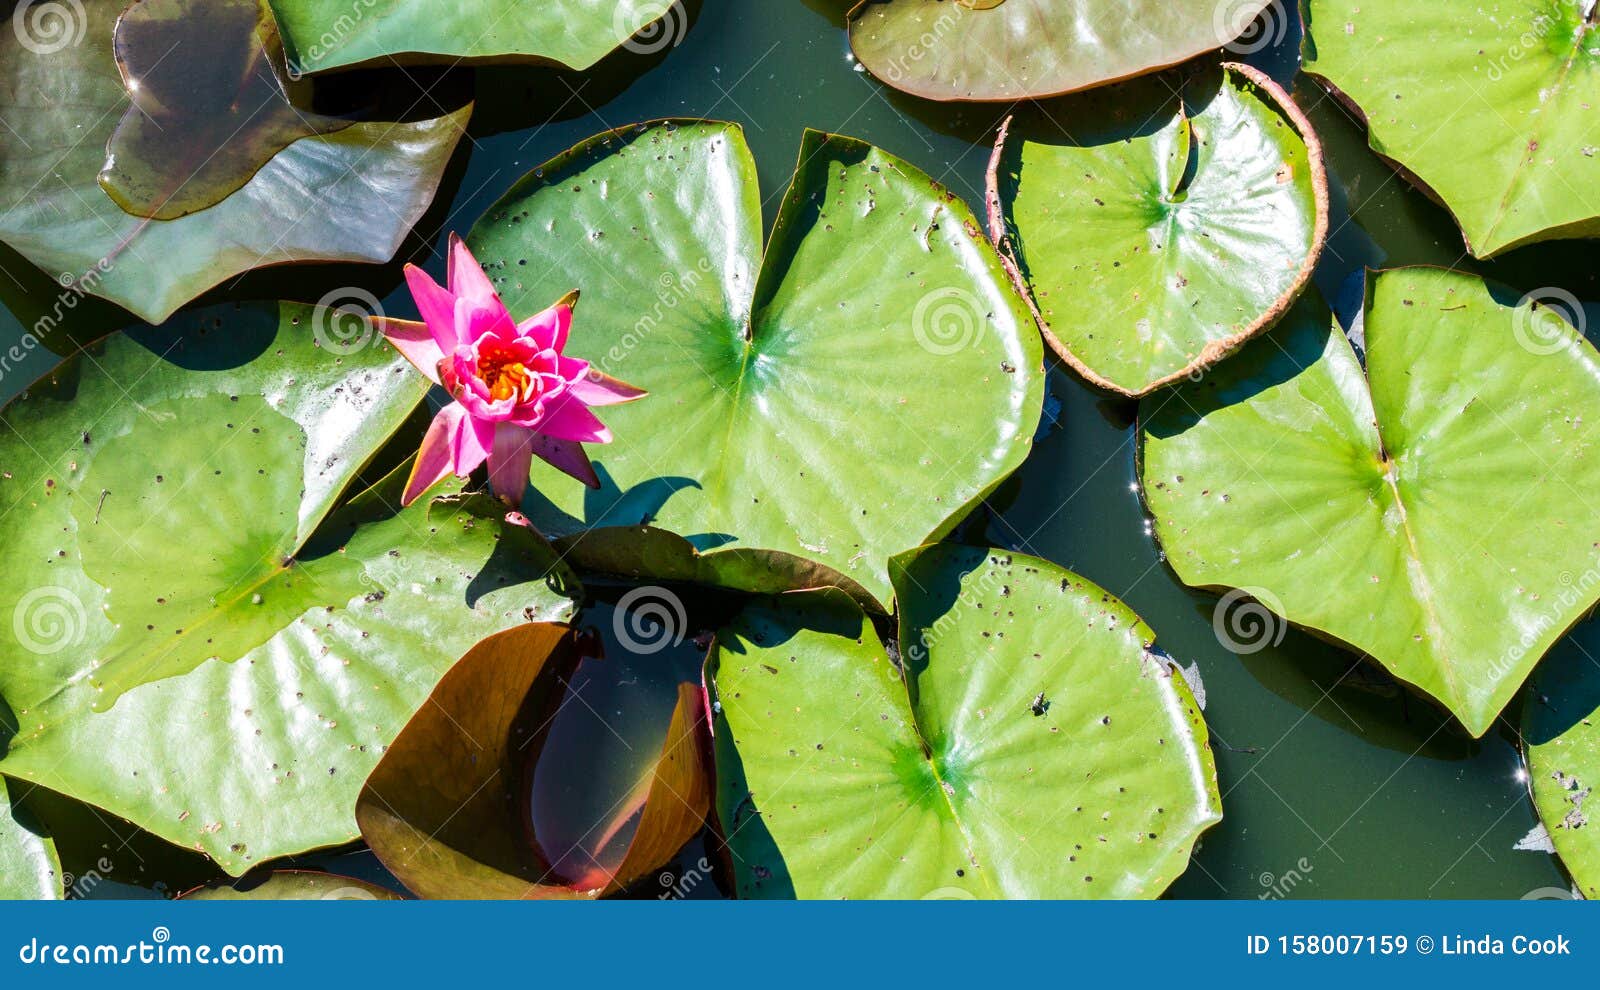 pink water lily with green lily pads